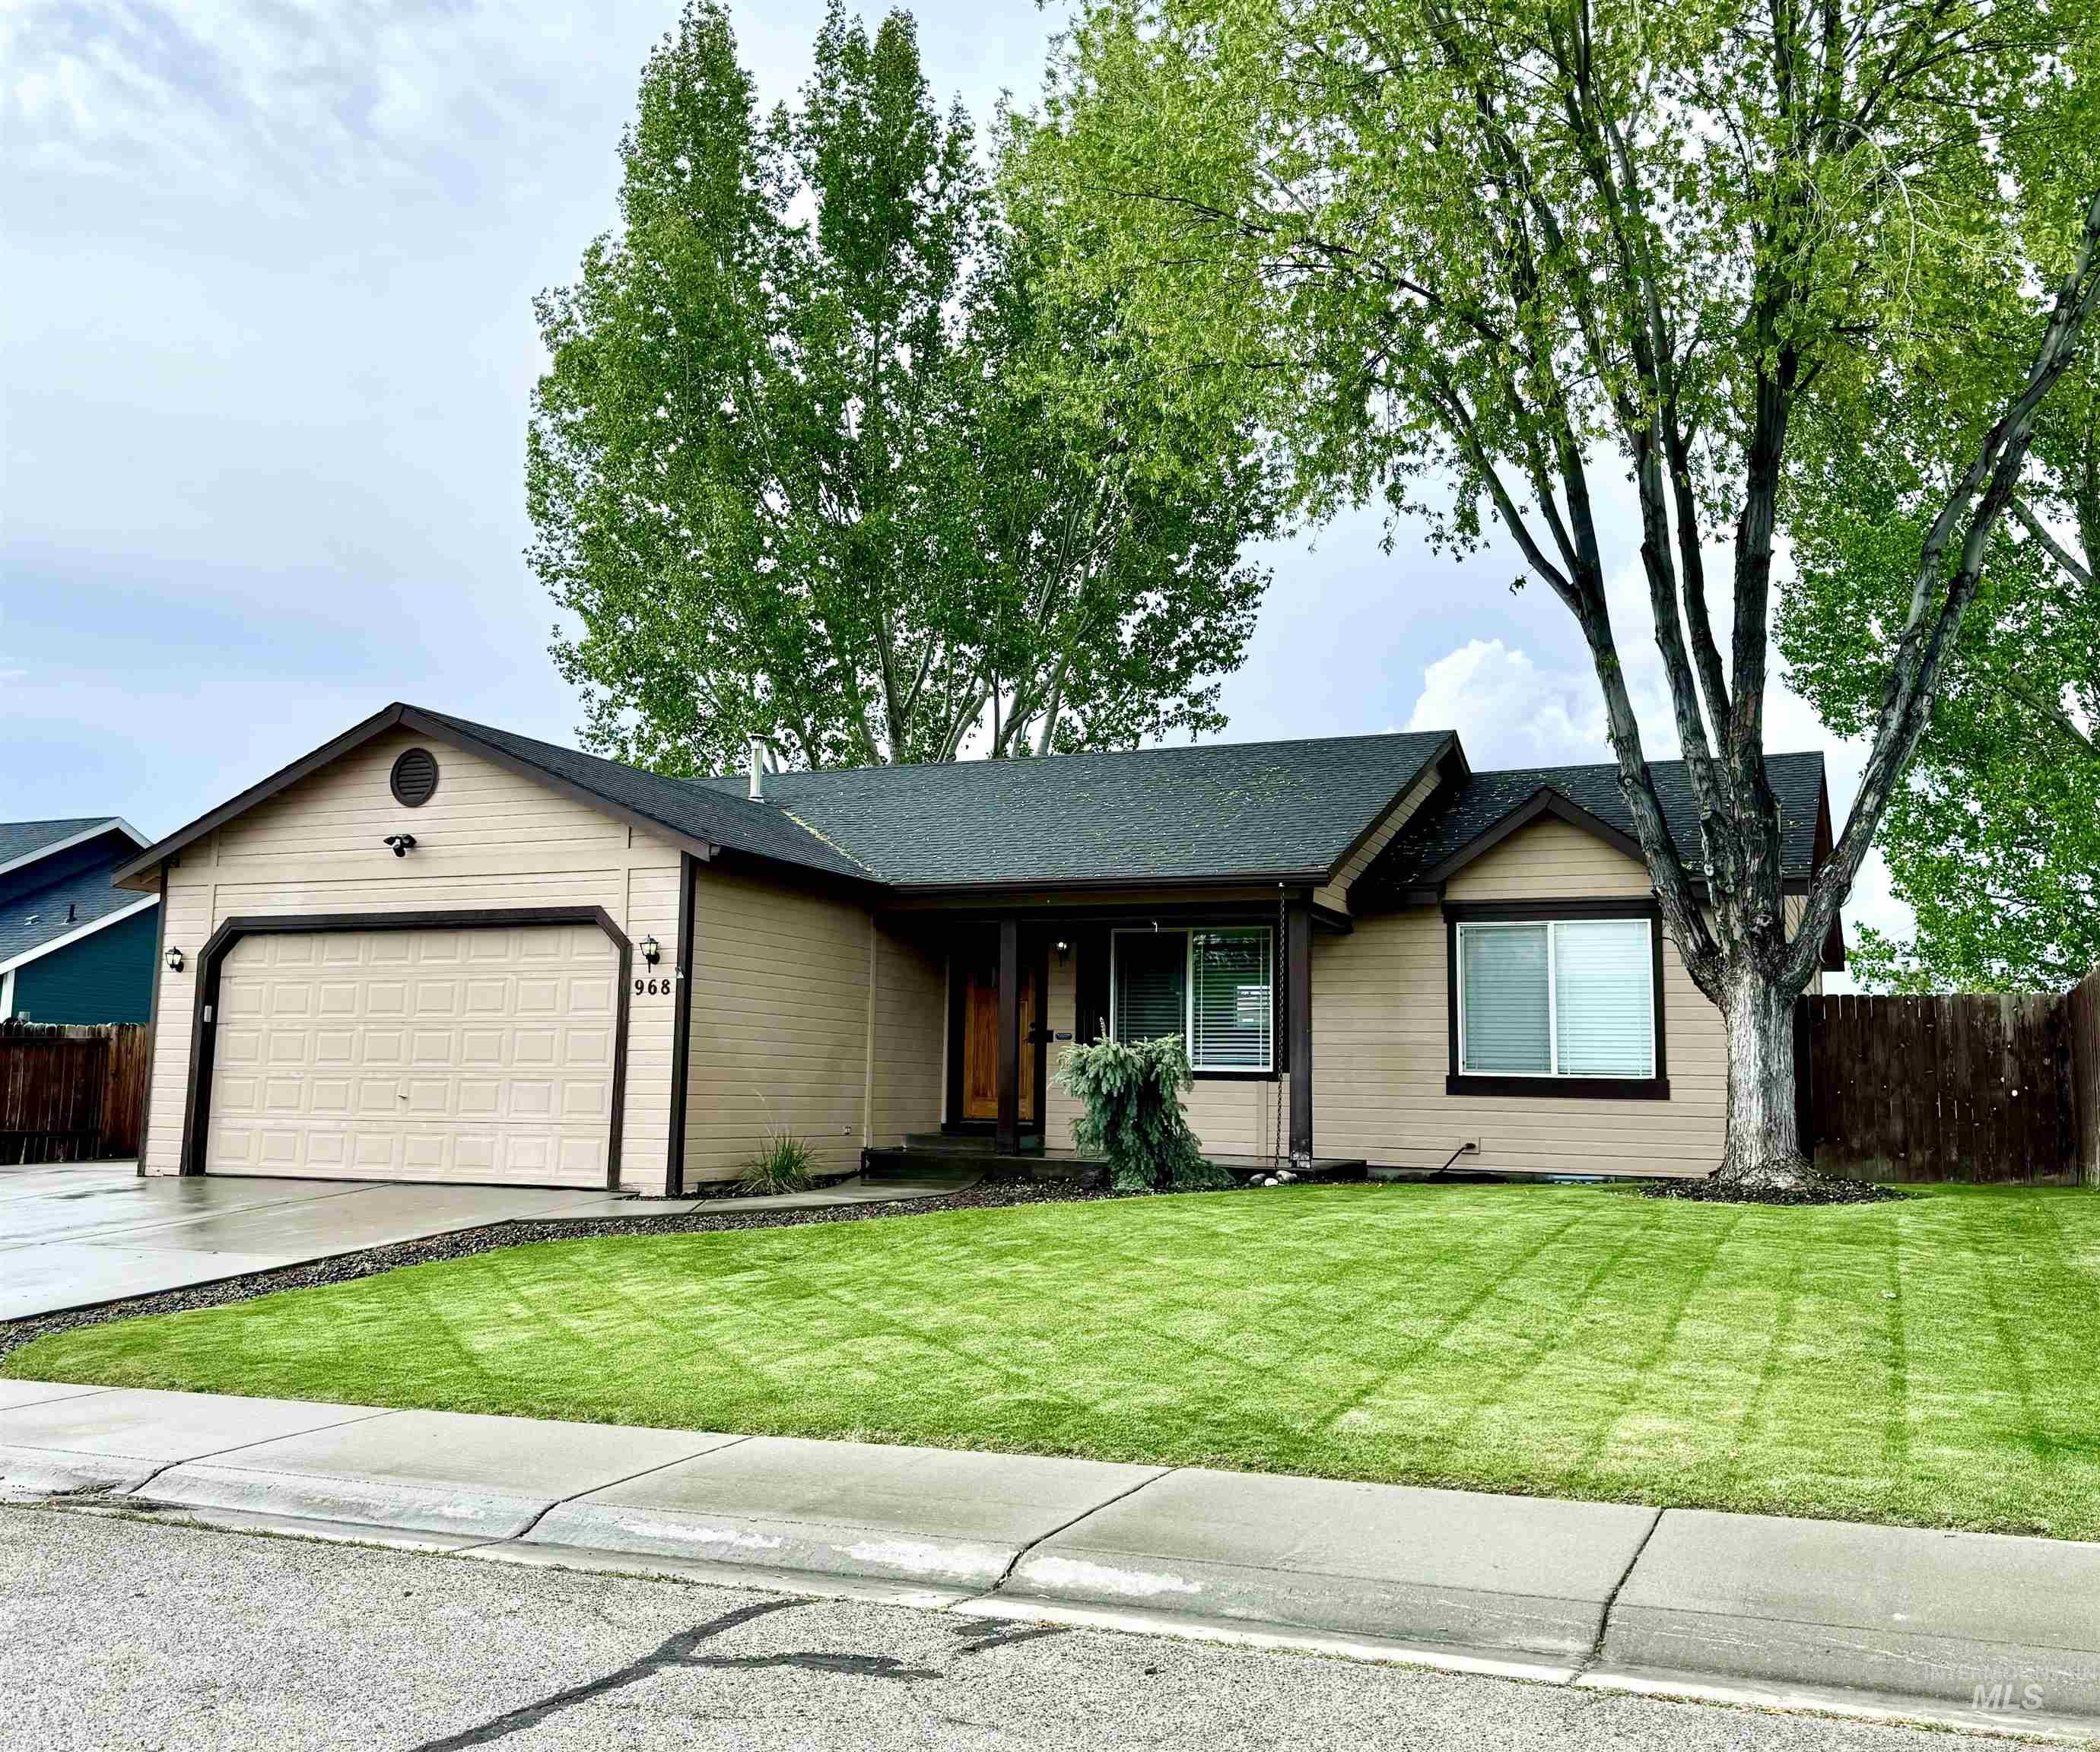 968 W Gold St., Kuna, Idaho 83634, 3 Bedrooms, 2 Bathrooms, Residential For Sale, Price $375,000,MLS 98909369